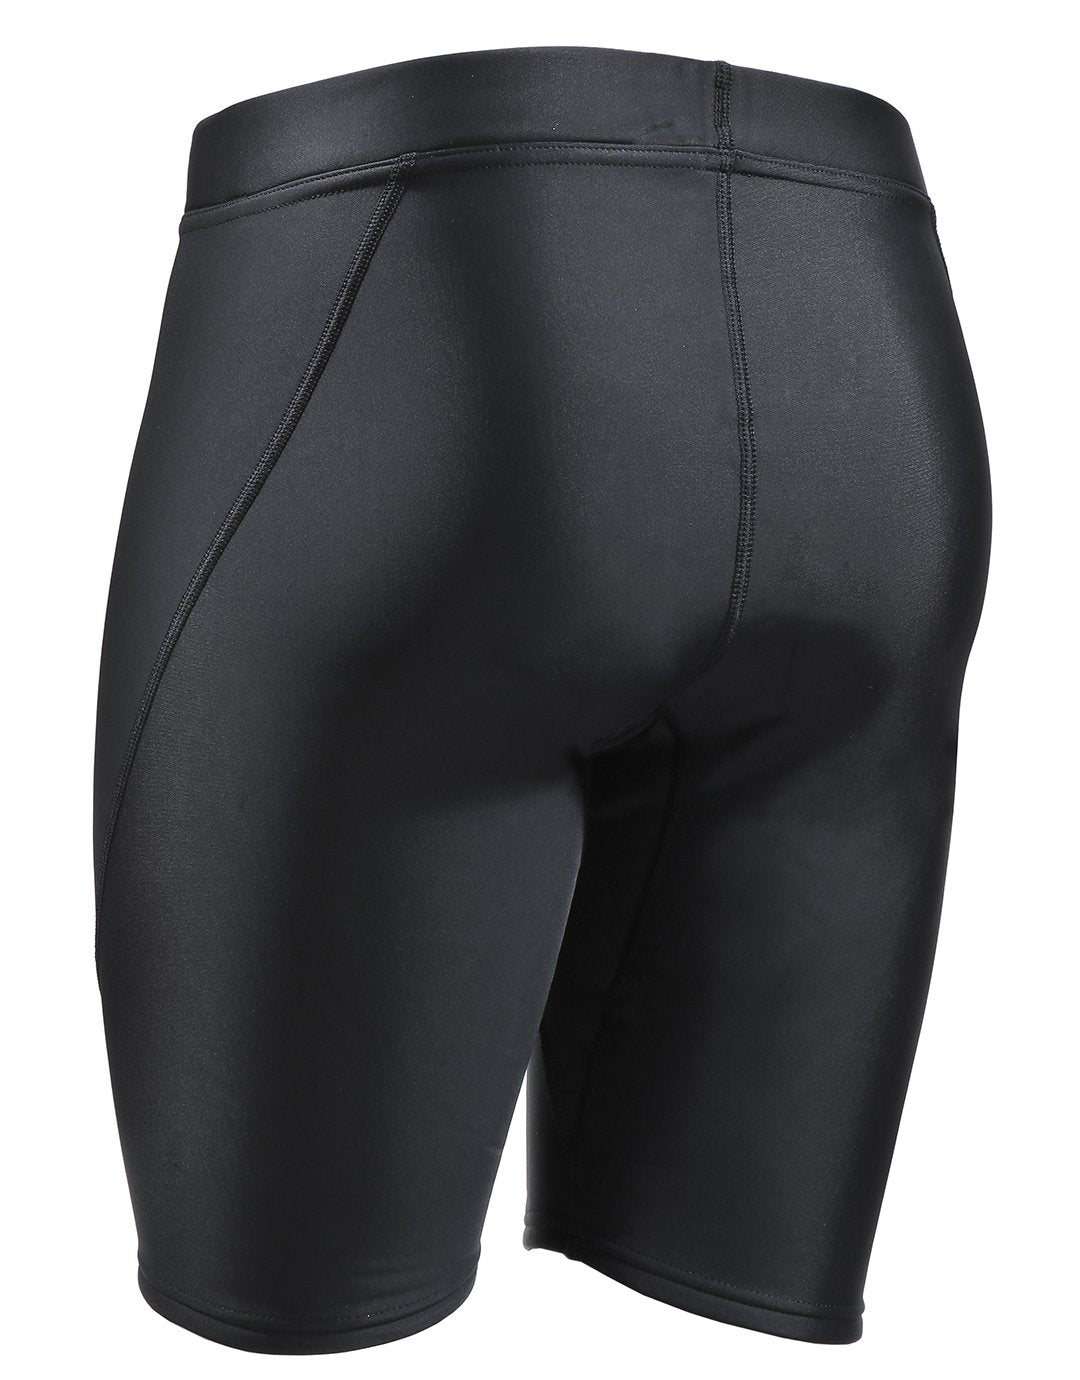 Fourth Element Men's Thermocline Shorts | Simply Scuba UK